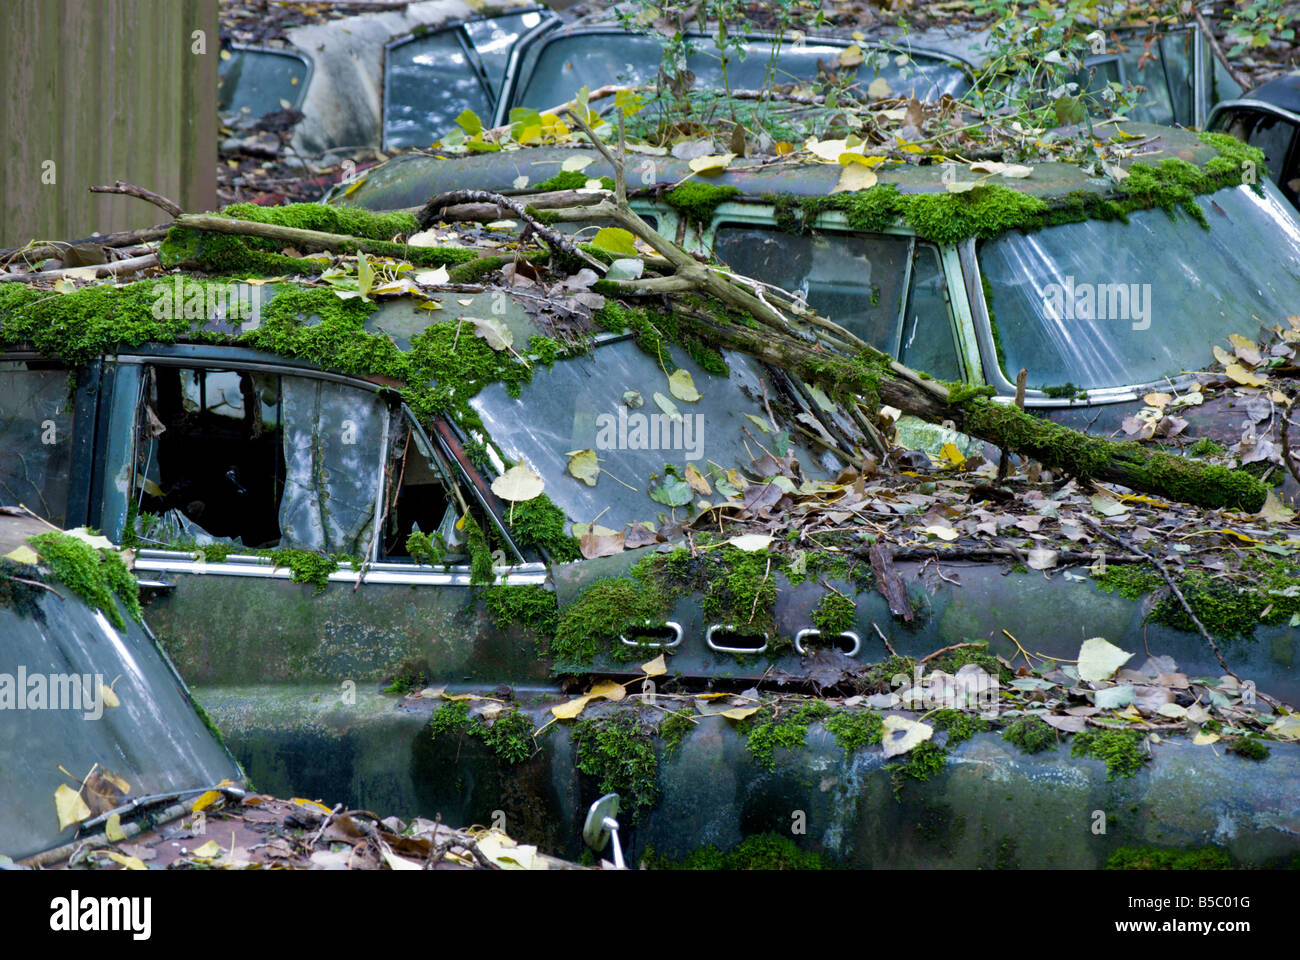 An old Buick automobile is covered in green moss as nature works to reclaim the junkyard Autofriedhof Gurbetal Switzerland Stock Photo